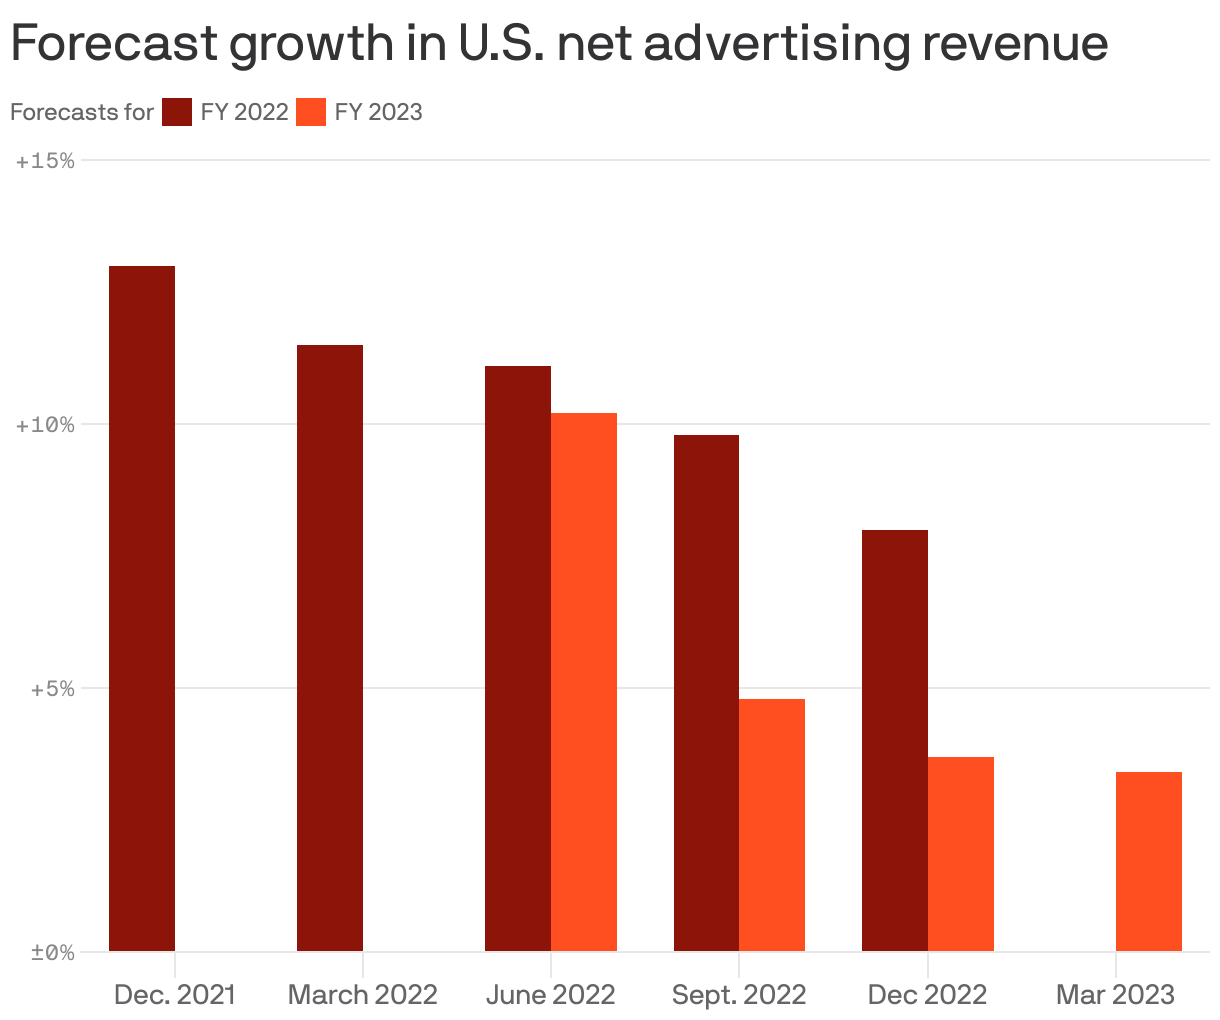 Forecasted growth in U.S. net advertising revenue